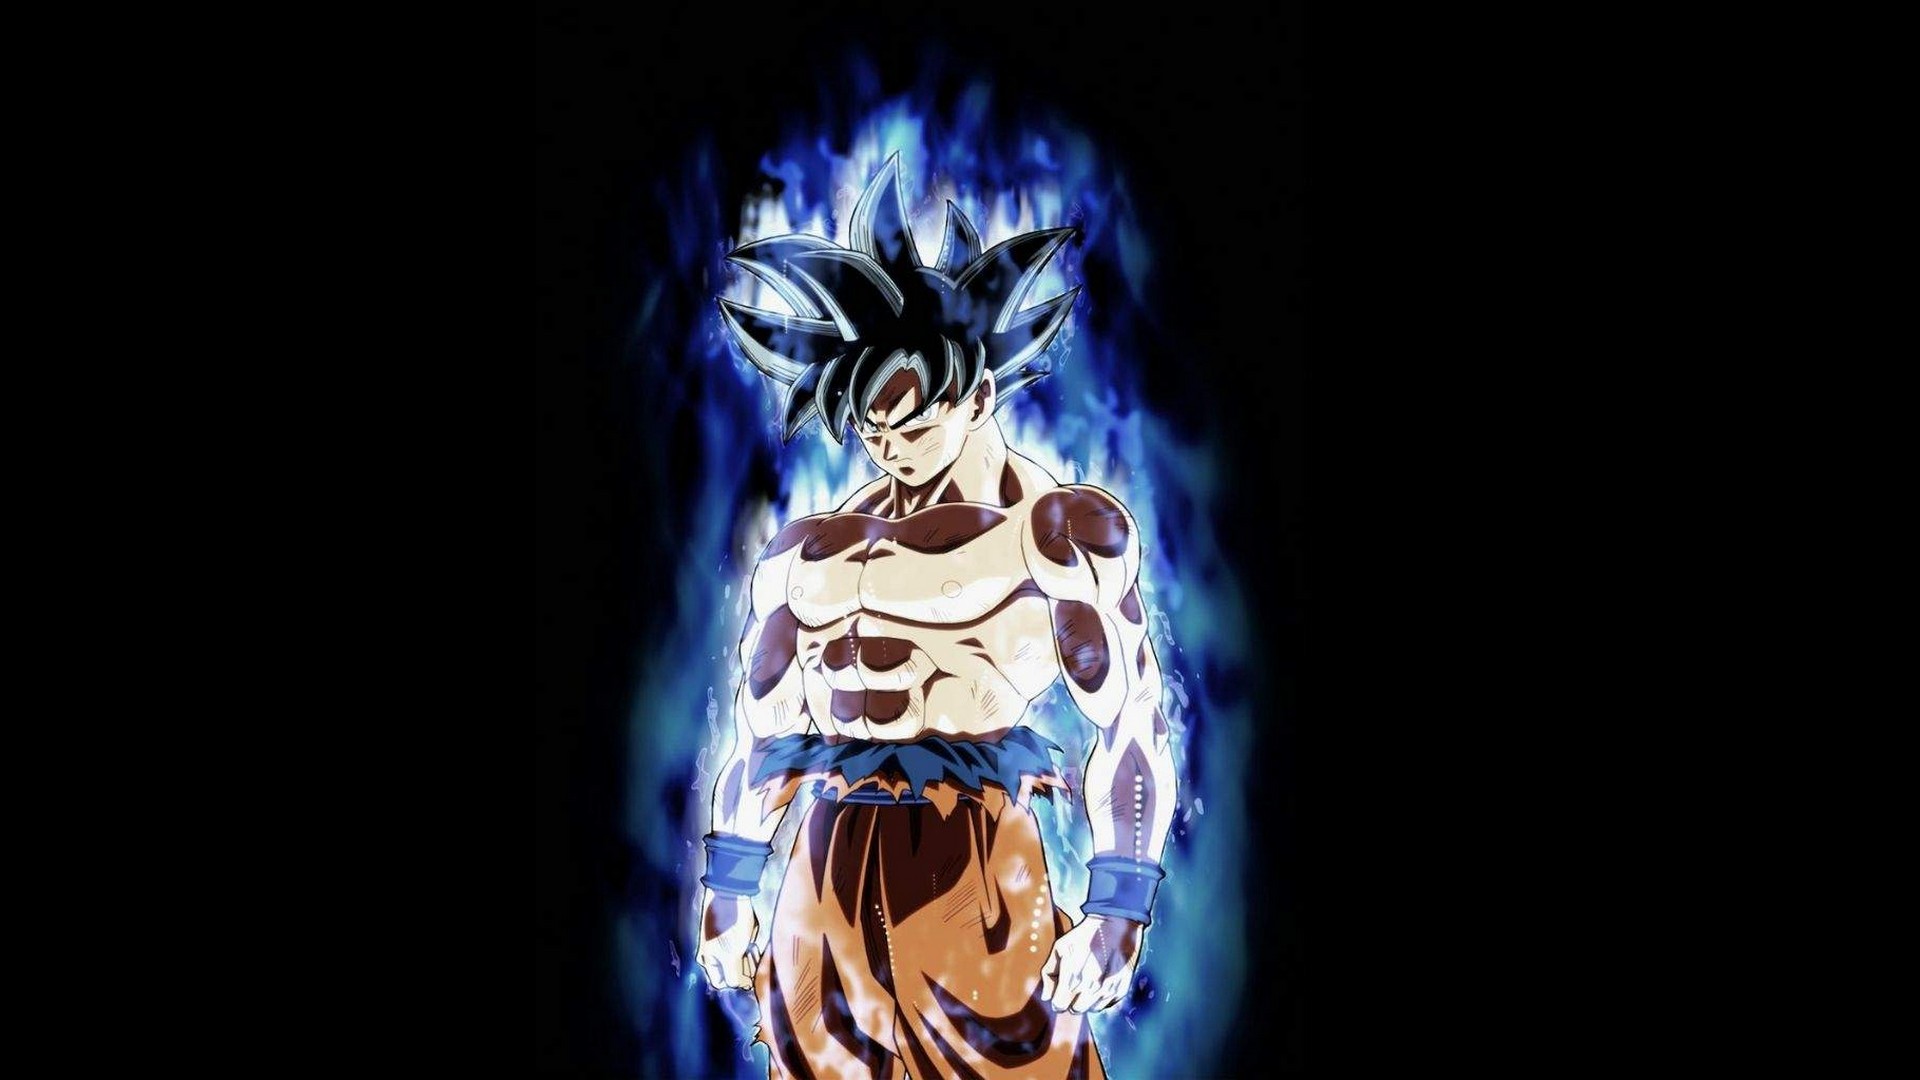 Wallpaper Goku Imagenes Desktop with resolution 1920X1080 pixel. You can use this wallpaper as background for your desktop Computer Screensavers, Android or iPhone smartphones